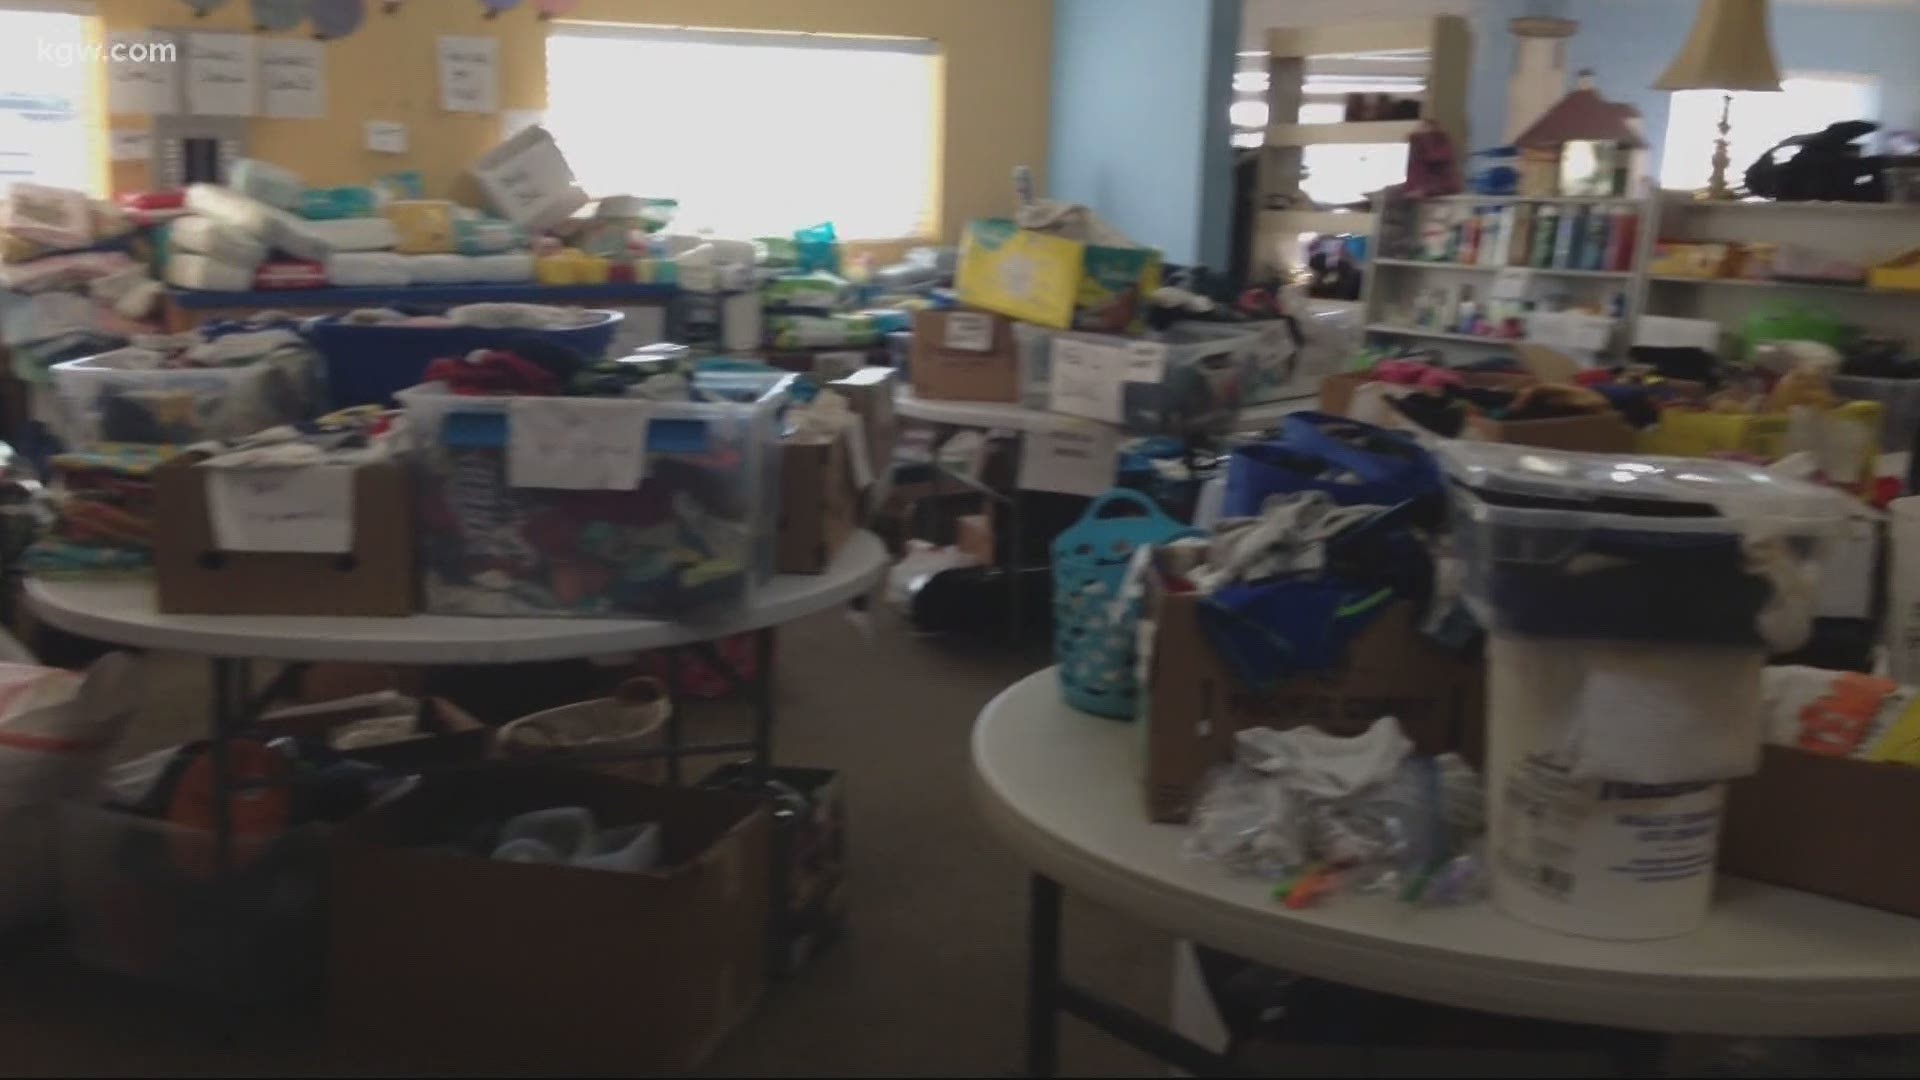 Hundreds of people are still displaced because of the Oregon wildfires. One small church in Lincoln City is making a huge difference for those in need.